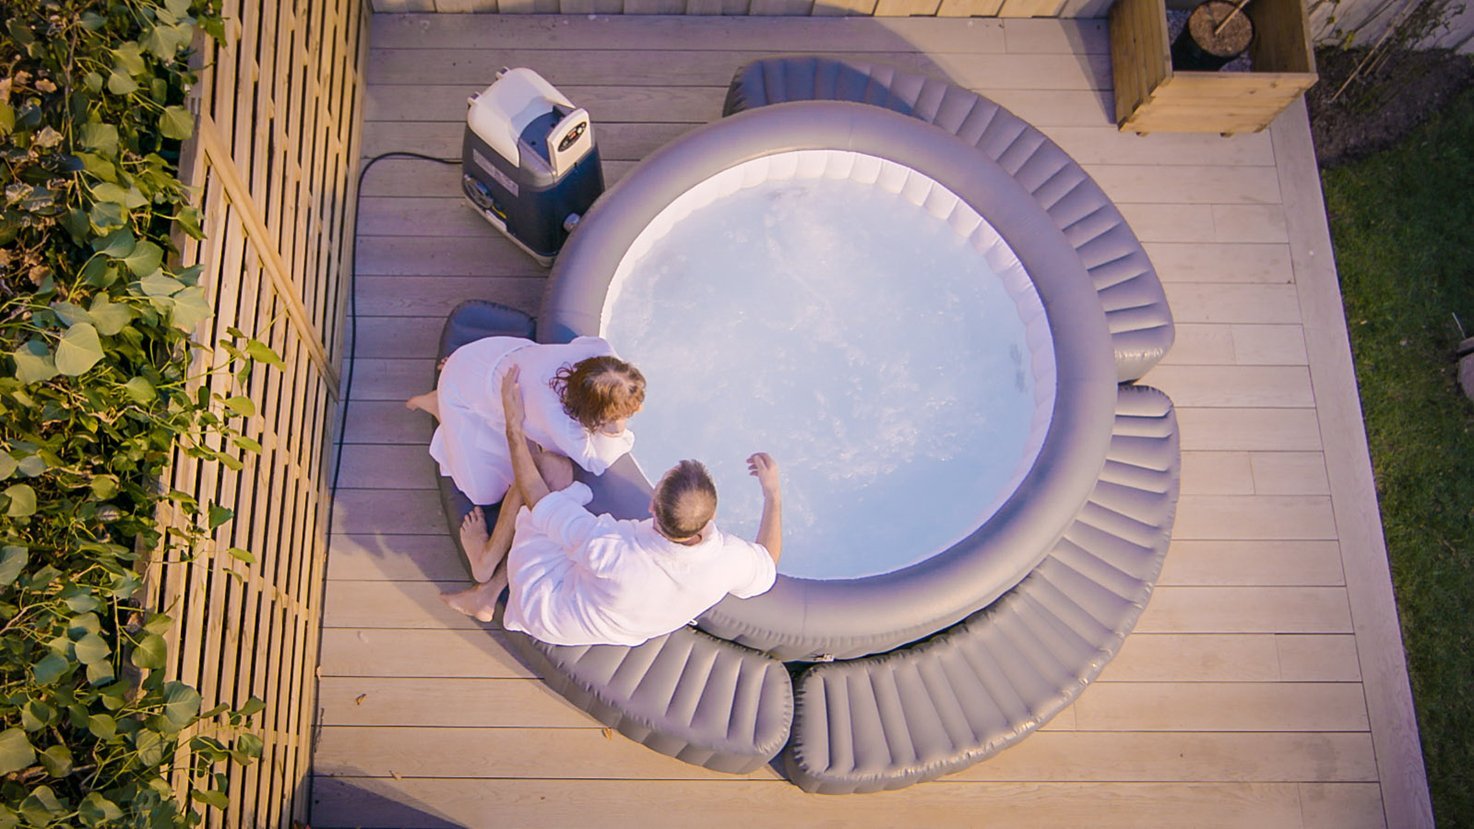 Lay Z Spa Hot Tub Steps And Surround